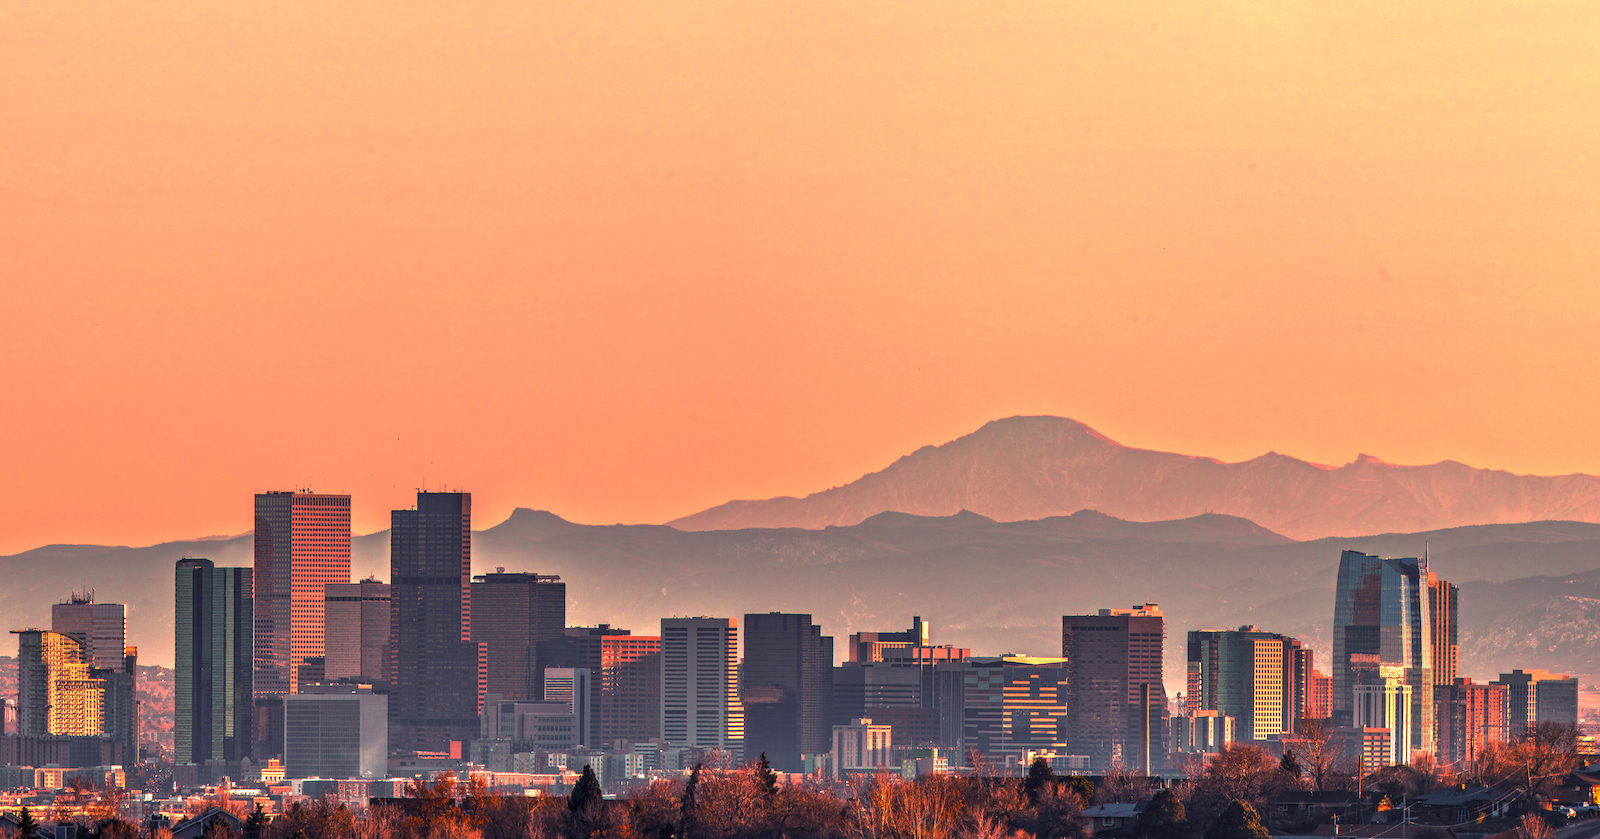 A photograph of the Denver skyline with mountains in the background, against an orange sky.